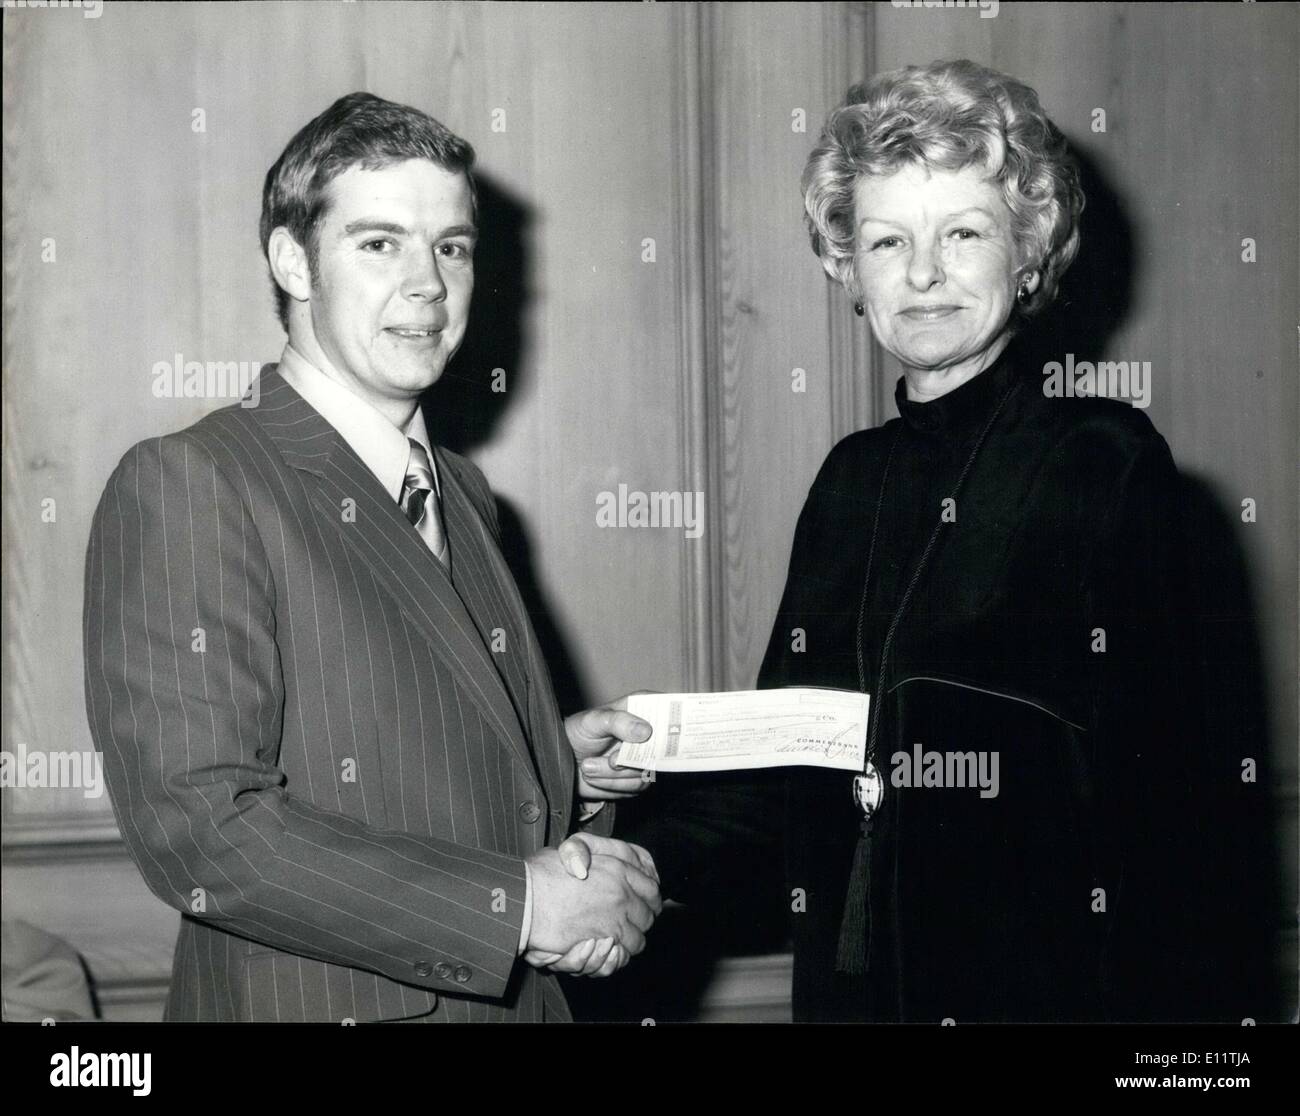 Nov. 22, 1979 - Cheque Presented For British Limbless Ex-service Men At The Savoy Hotel: Sgt. Lesslie Pasonso, club match of the Bumbe Water rats Angling club, West-Germany, (S Club of British Servicemen,m their dependents, and attached UK citizens). presenting a cheque for ?1,034 for the benefit of the British Laimbless Ex-Service men's Association (BLESMA) to Elaine Stretch, the, the American actress, at the Savoy Hotel last night. The cheque represents the proceeds of the Marathon sponsored Fish. Stock Photo